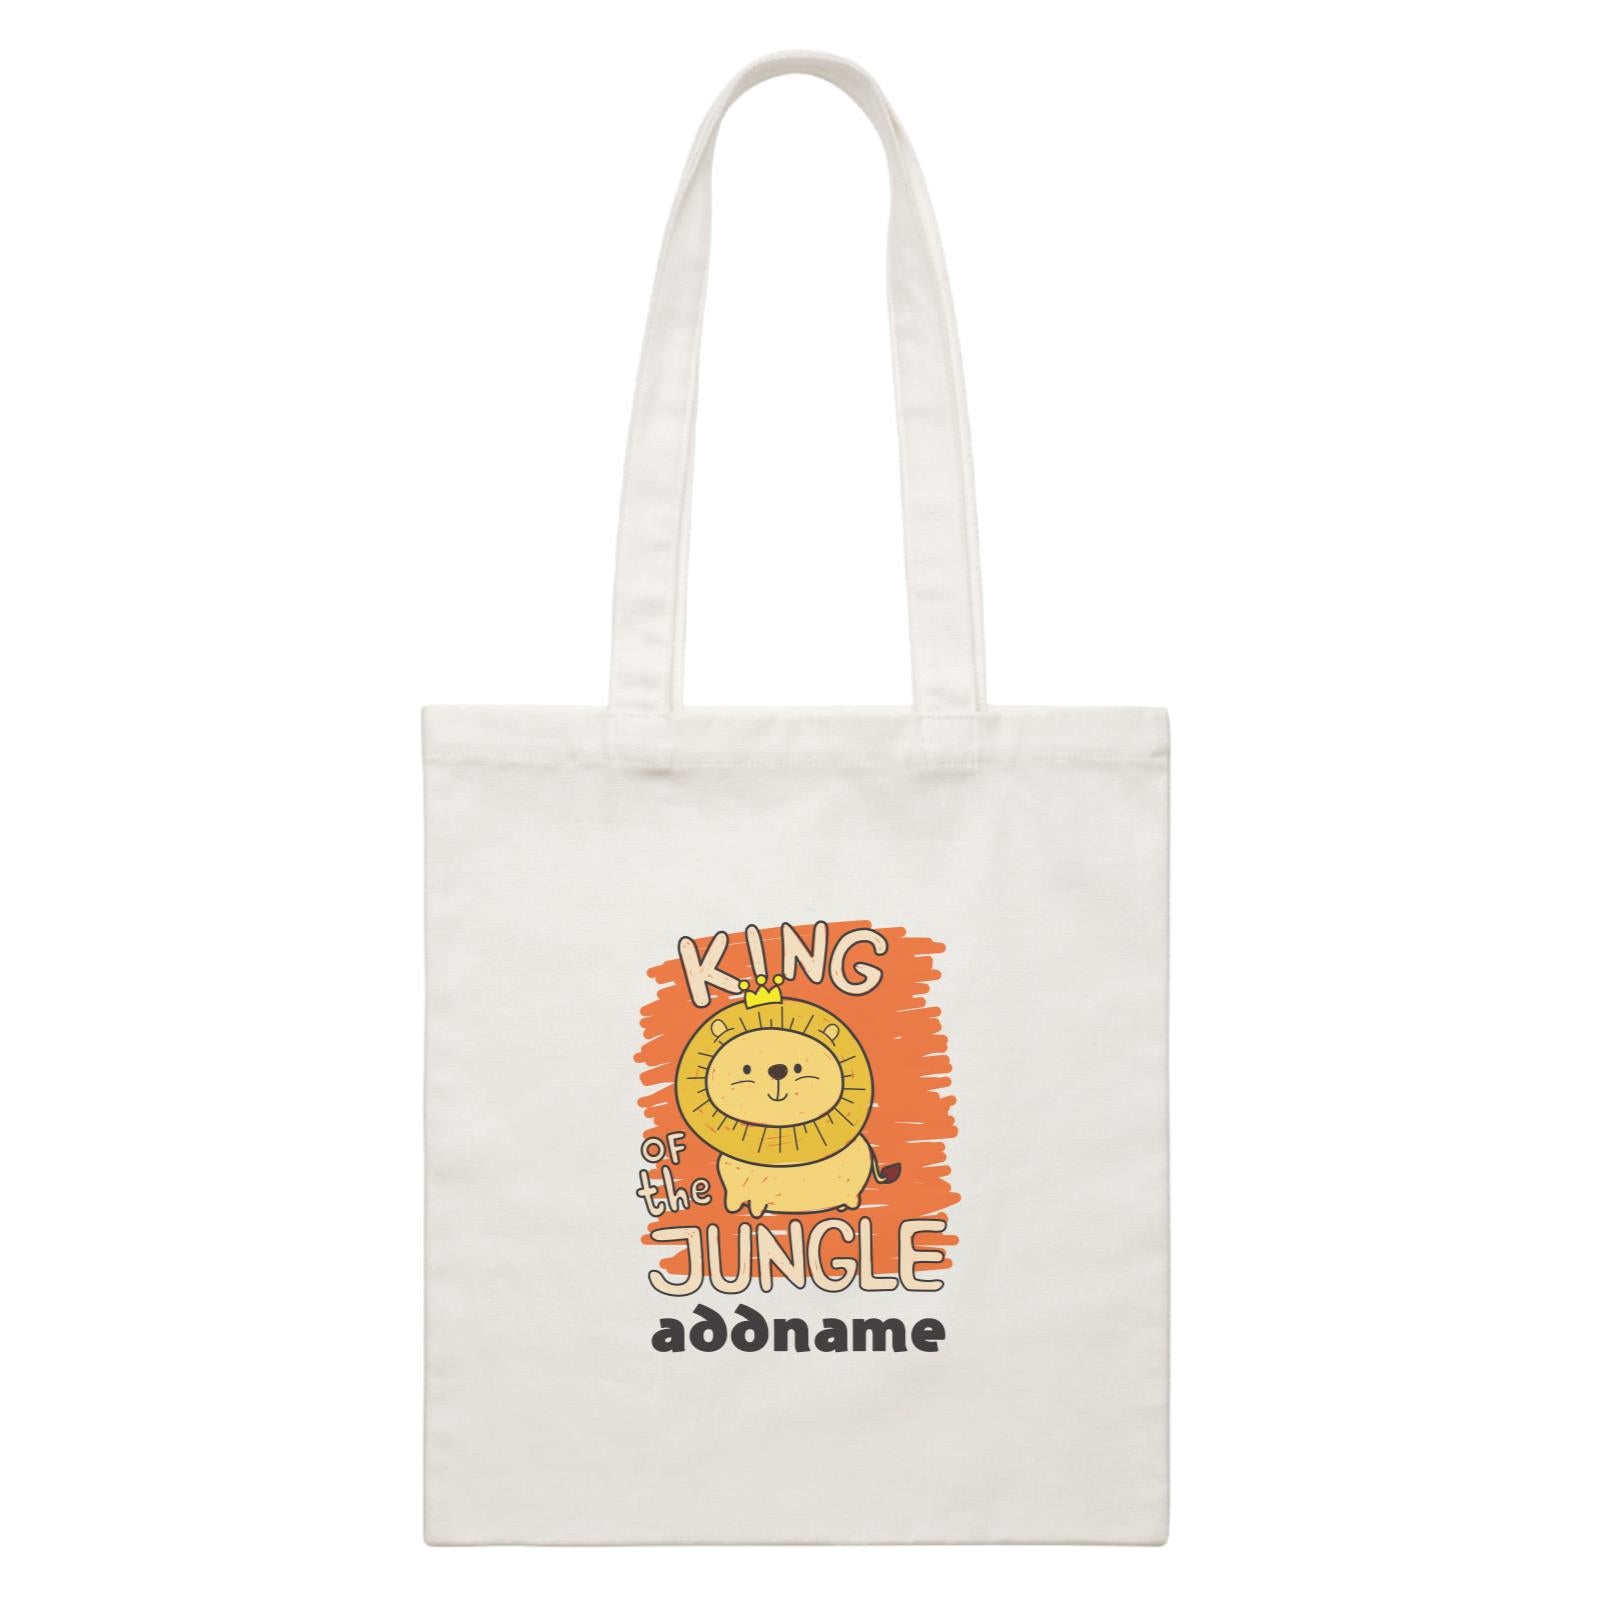 Cool Cute Animals Lion King Of The Jungle Addname White Canvas Bag